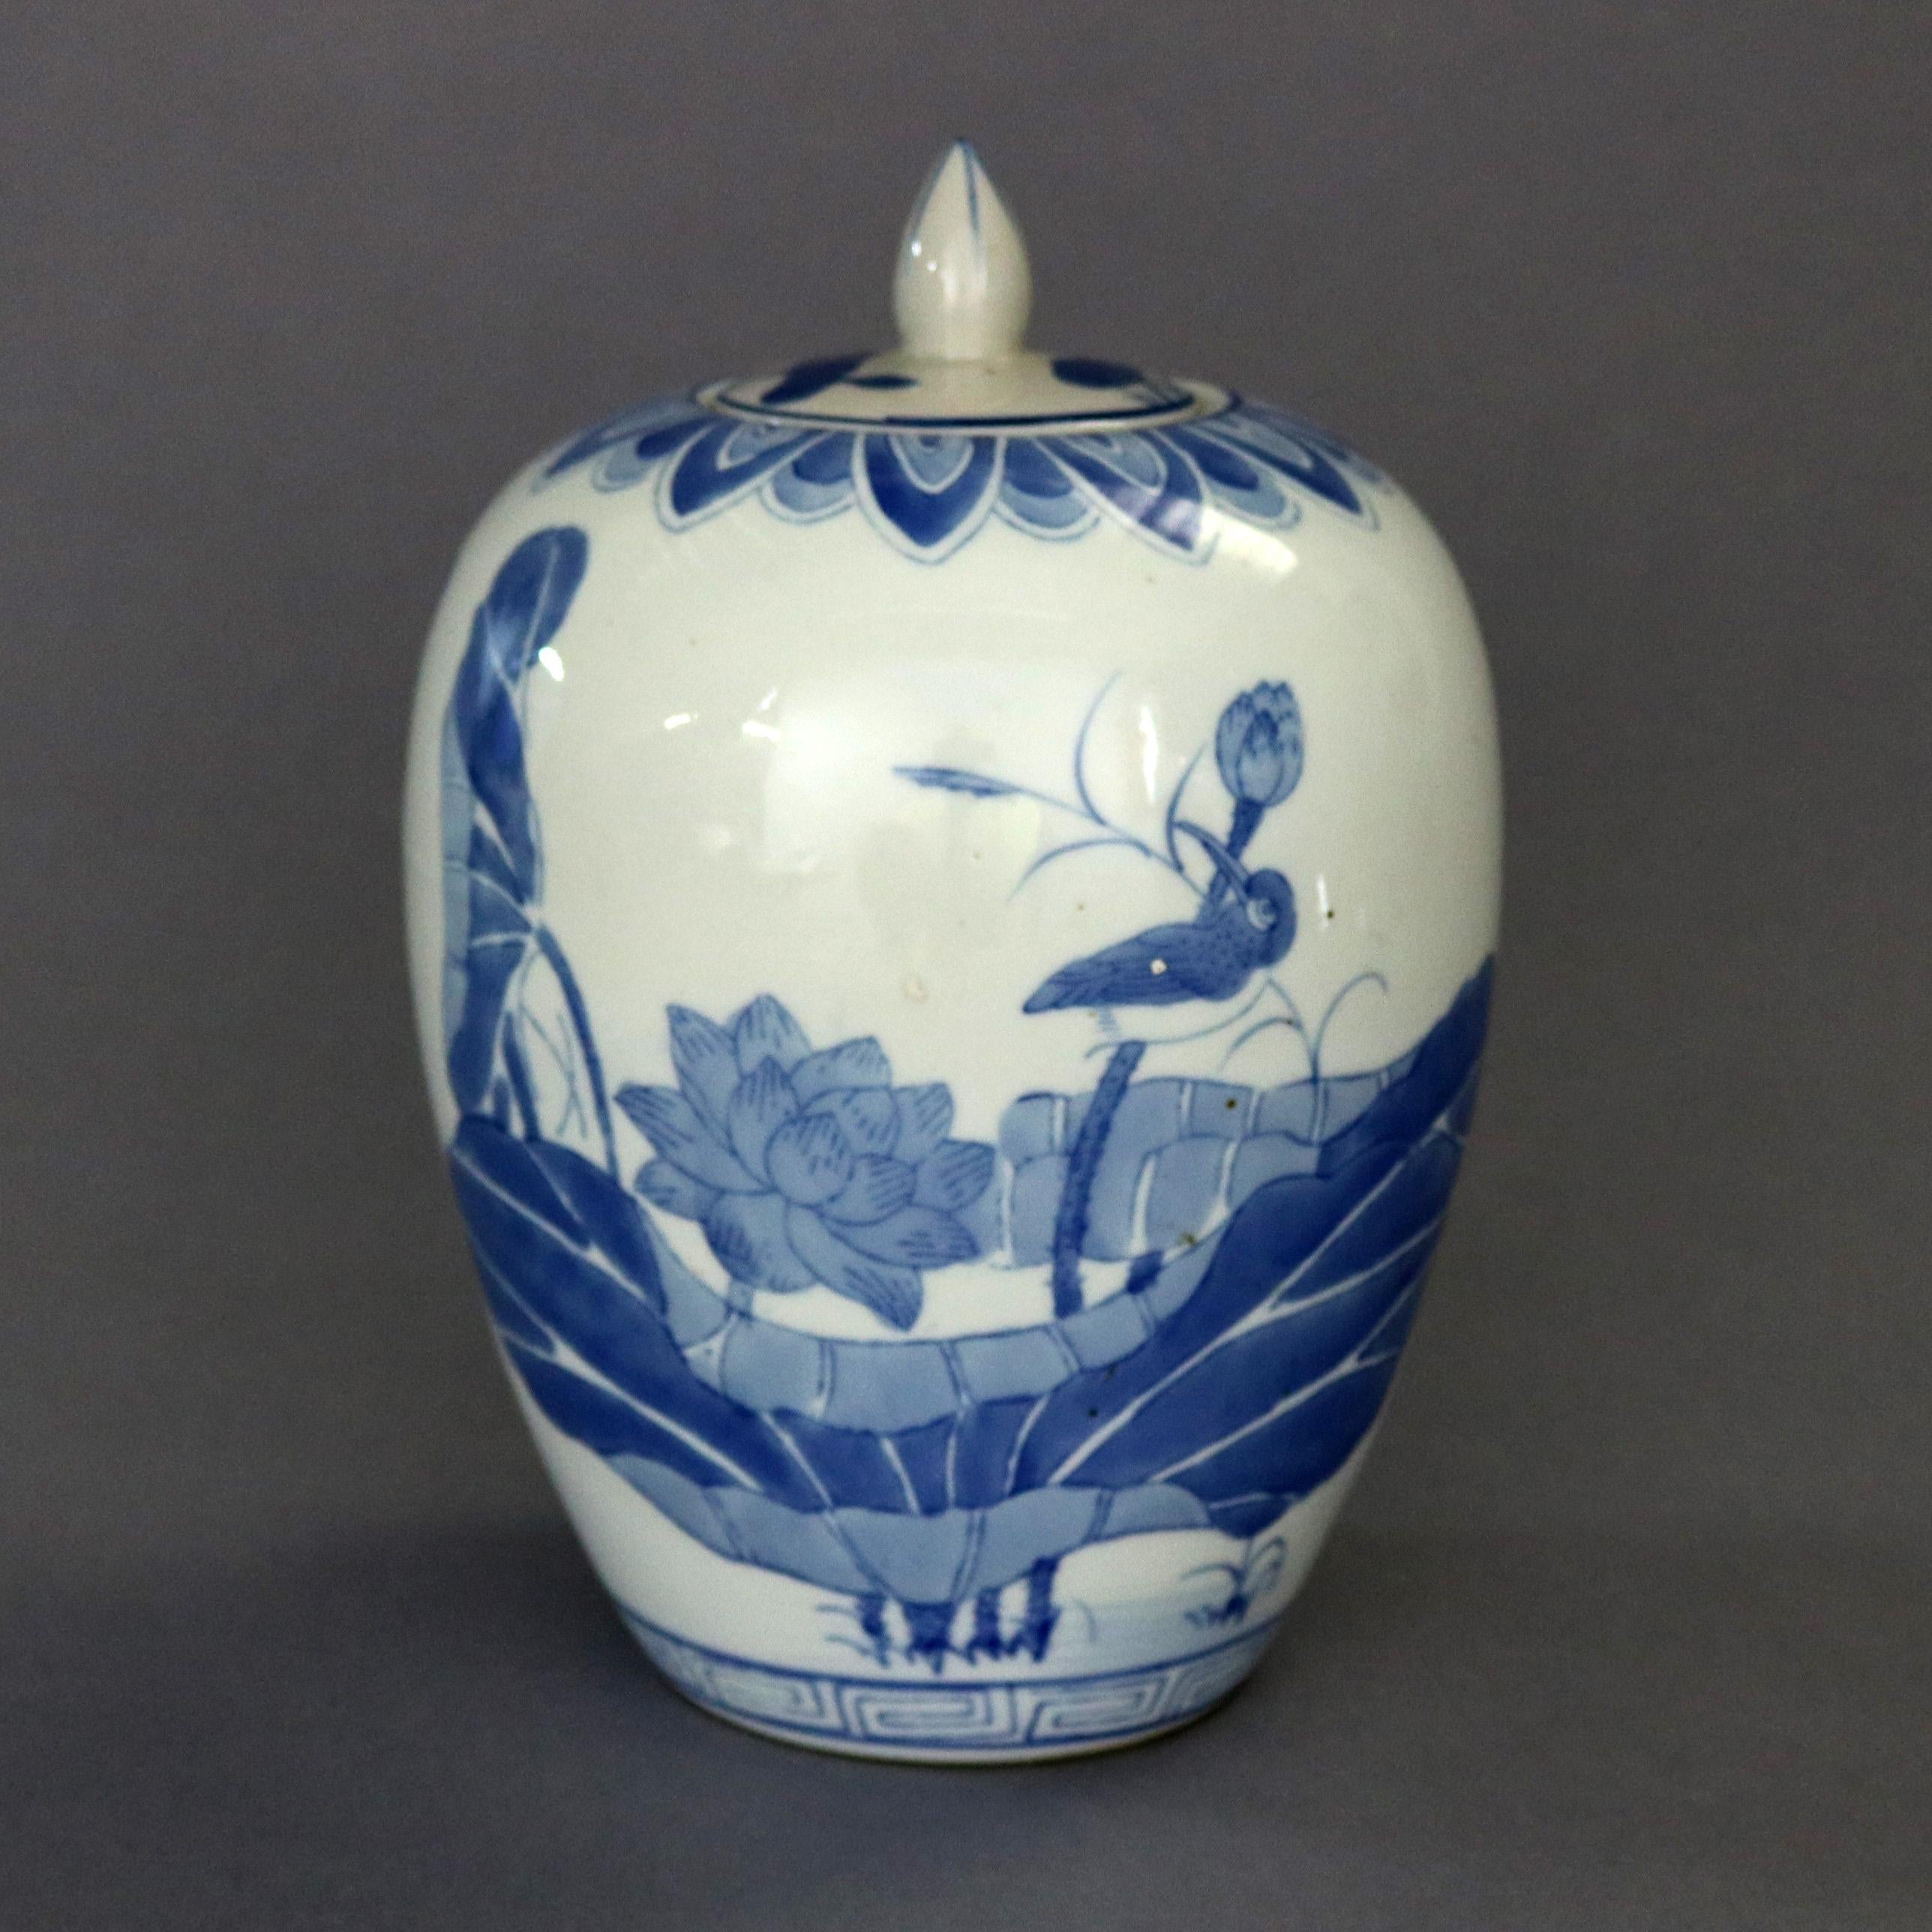 A vintage Chinese pictorial blue and white porcelain ginger jar offers hand painted marsh scene with flowers and birds, collar with repeating stylized leaf pattern and lower Greek Key bordering, 20th century

Measures: 10.25